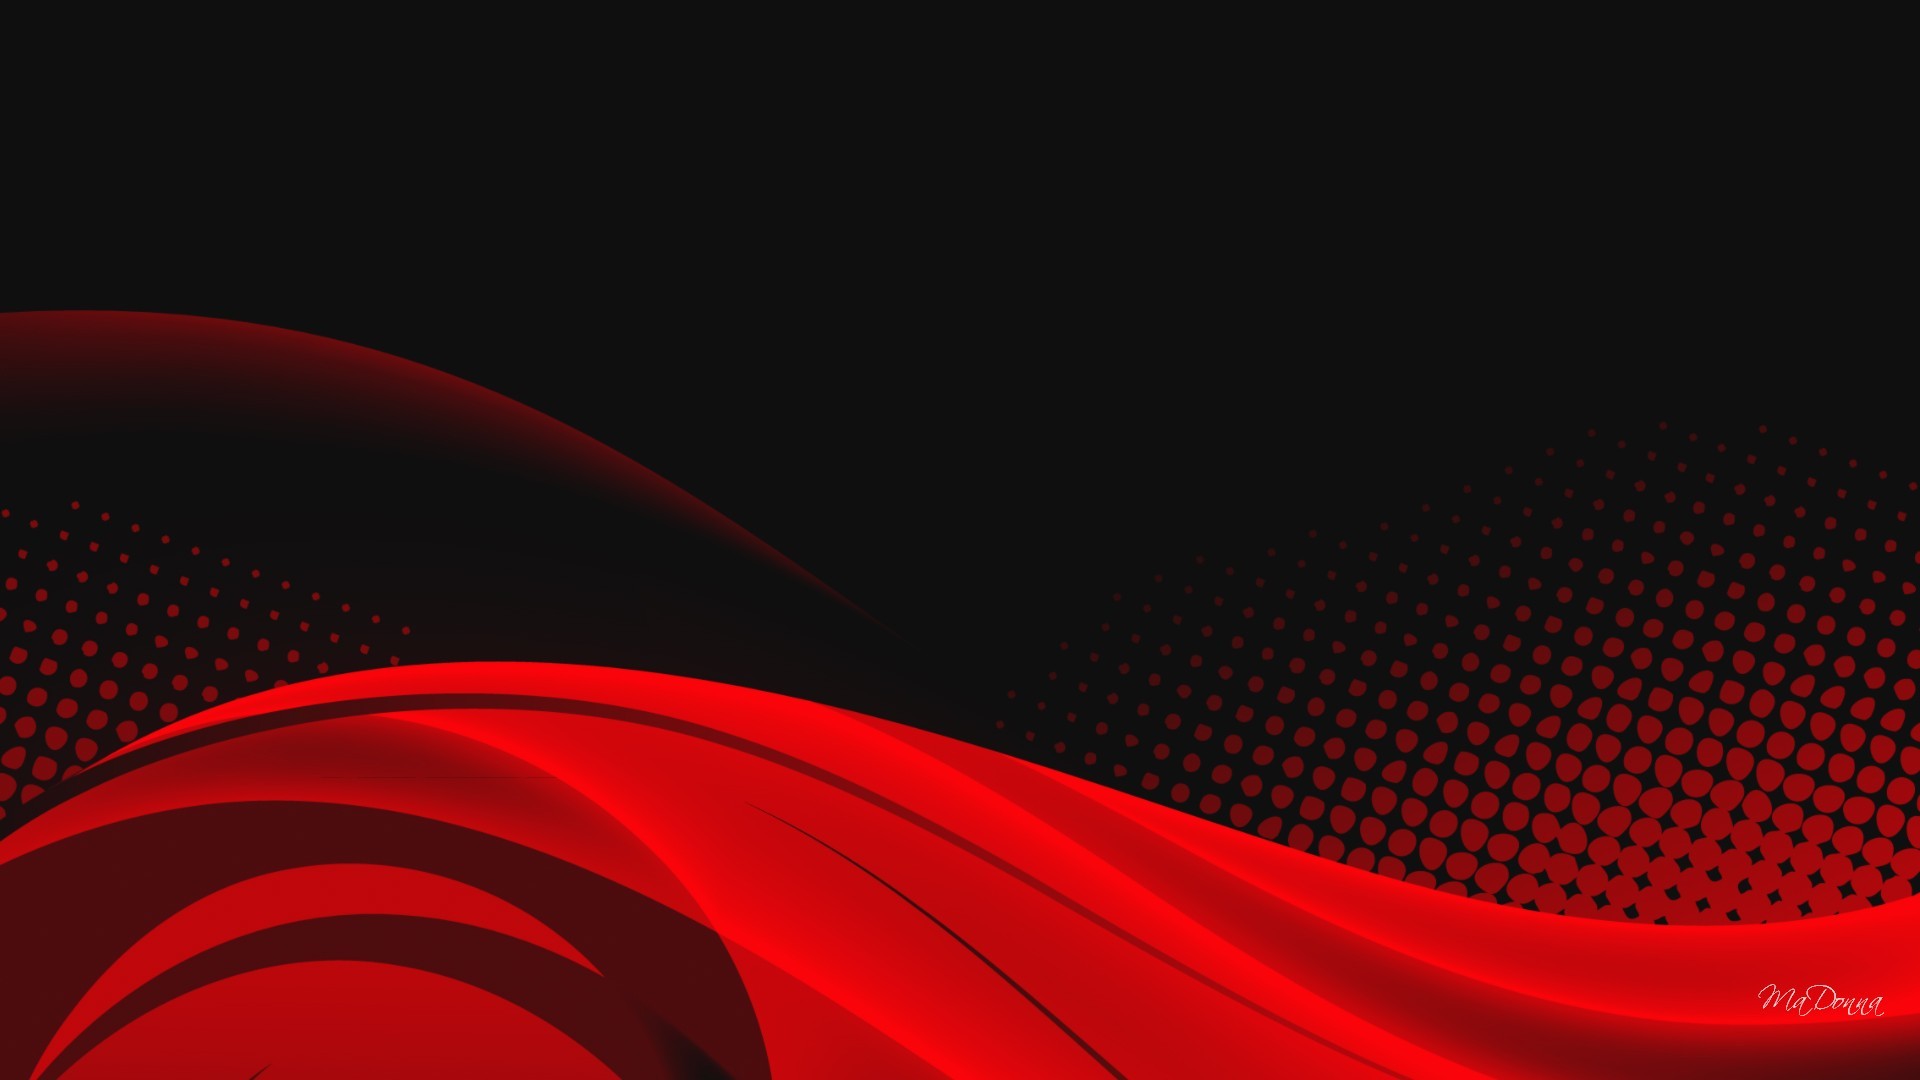 1920x1080 ... red and black wallpaper for computer 4 background; black and reddish  background washdri com ...